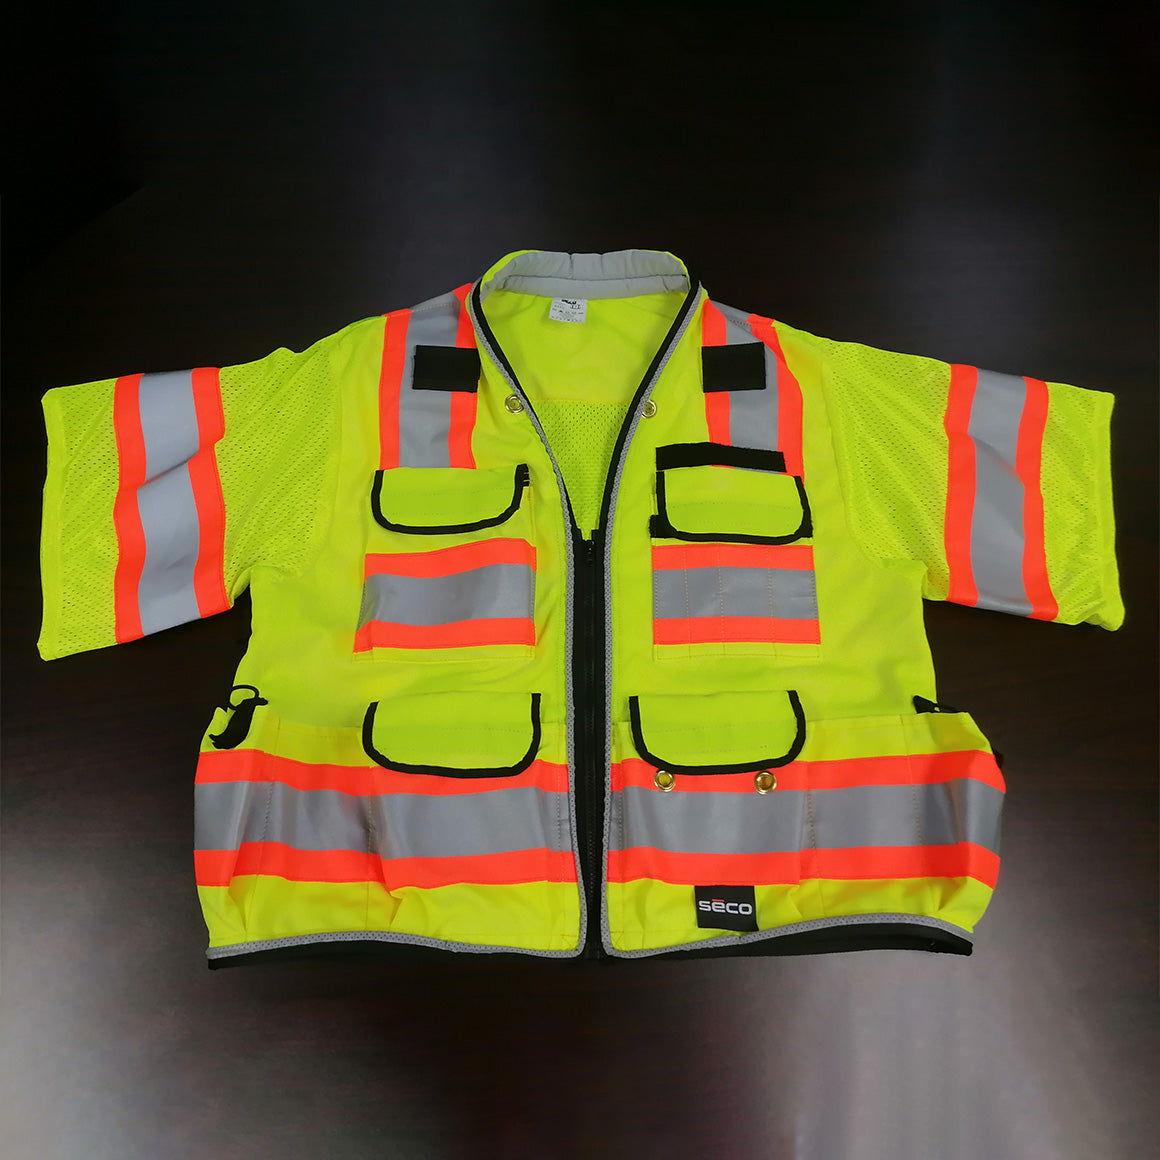 SECO 8365 Class 3 Safety Utility Vest - LED Lighted